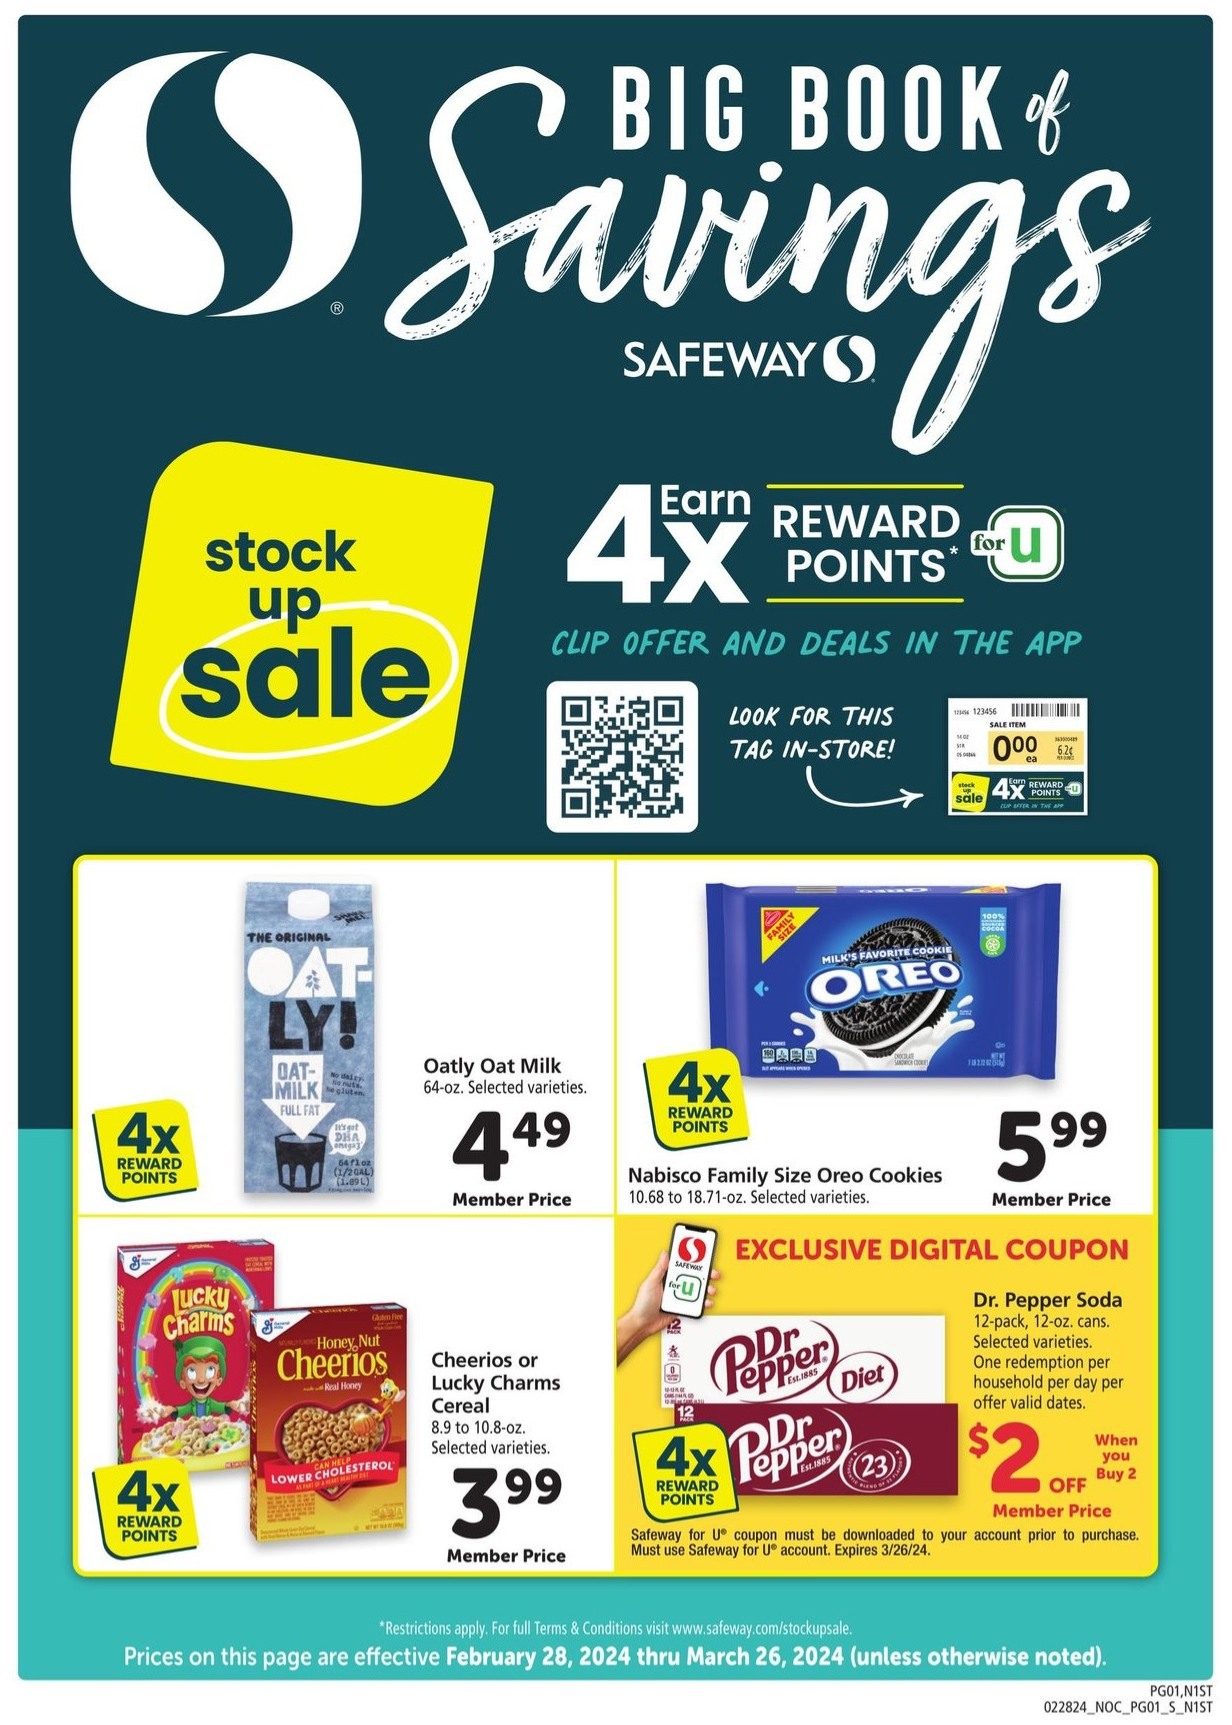 Safeway Big Book of Savings 28th February – 26th March 2024 Page 1